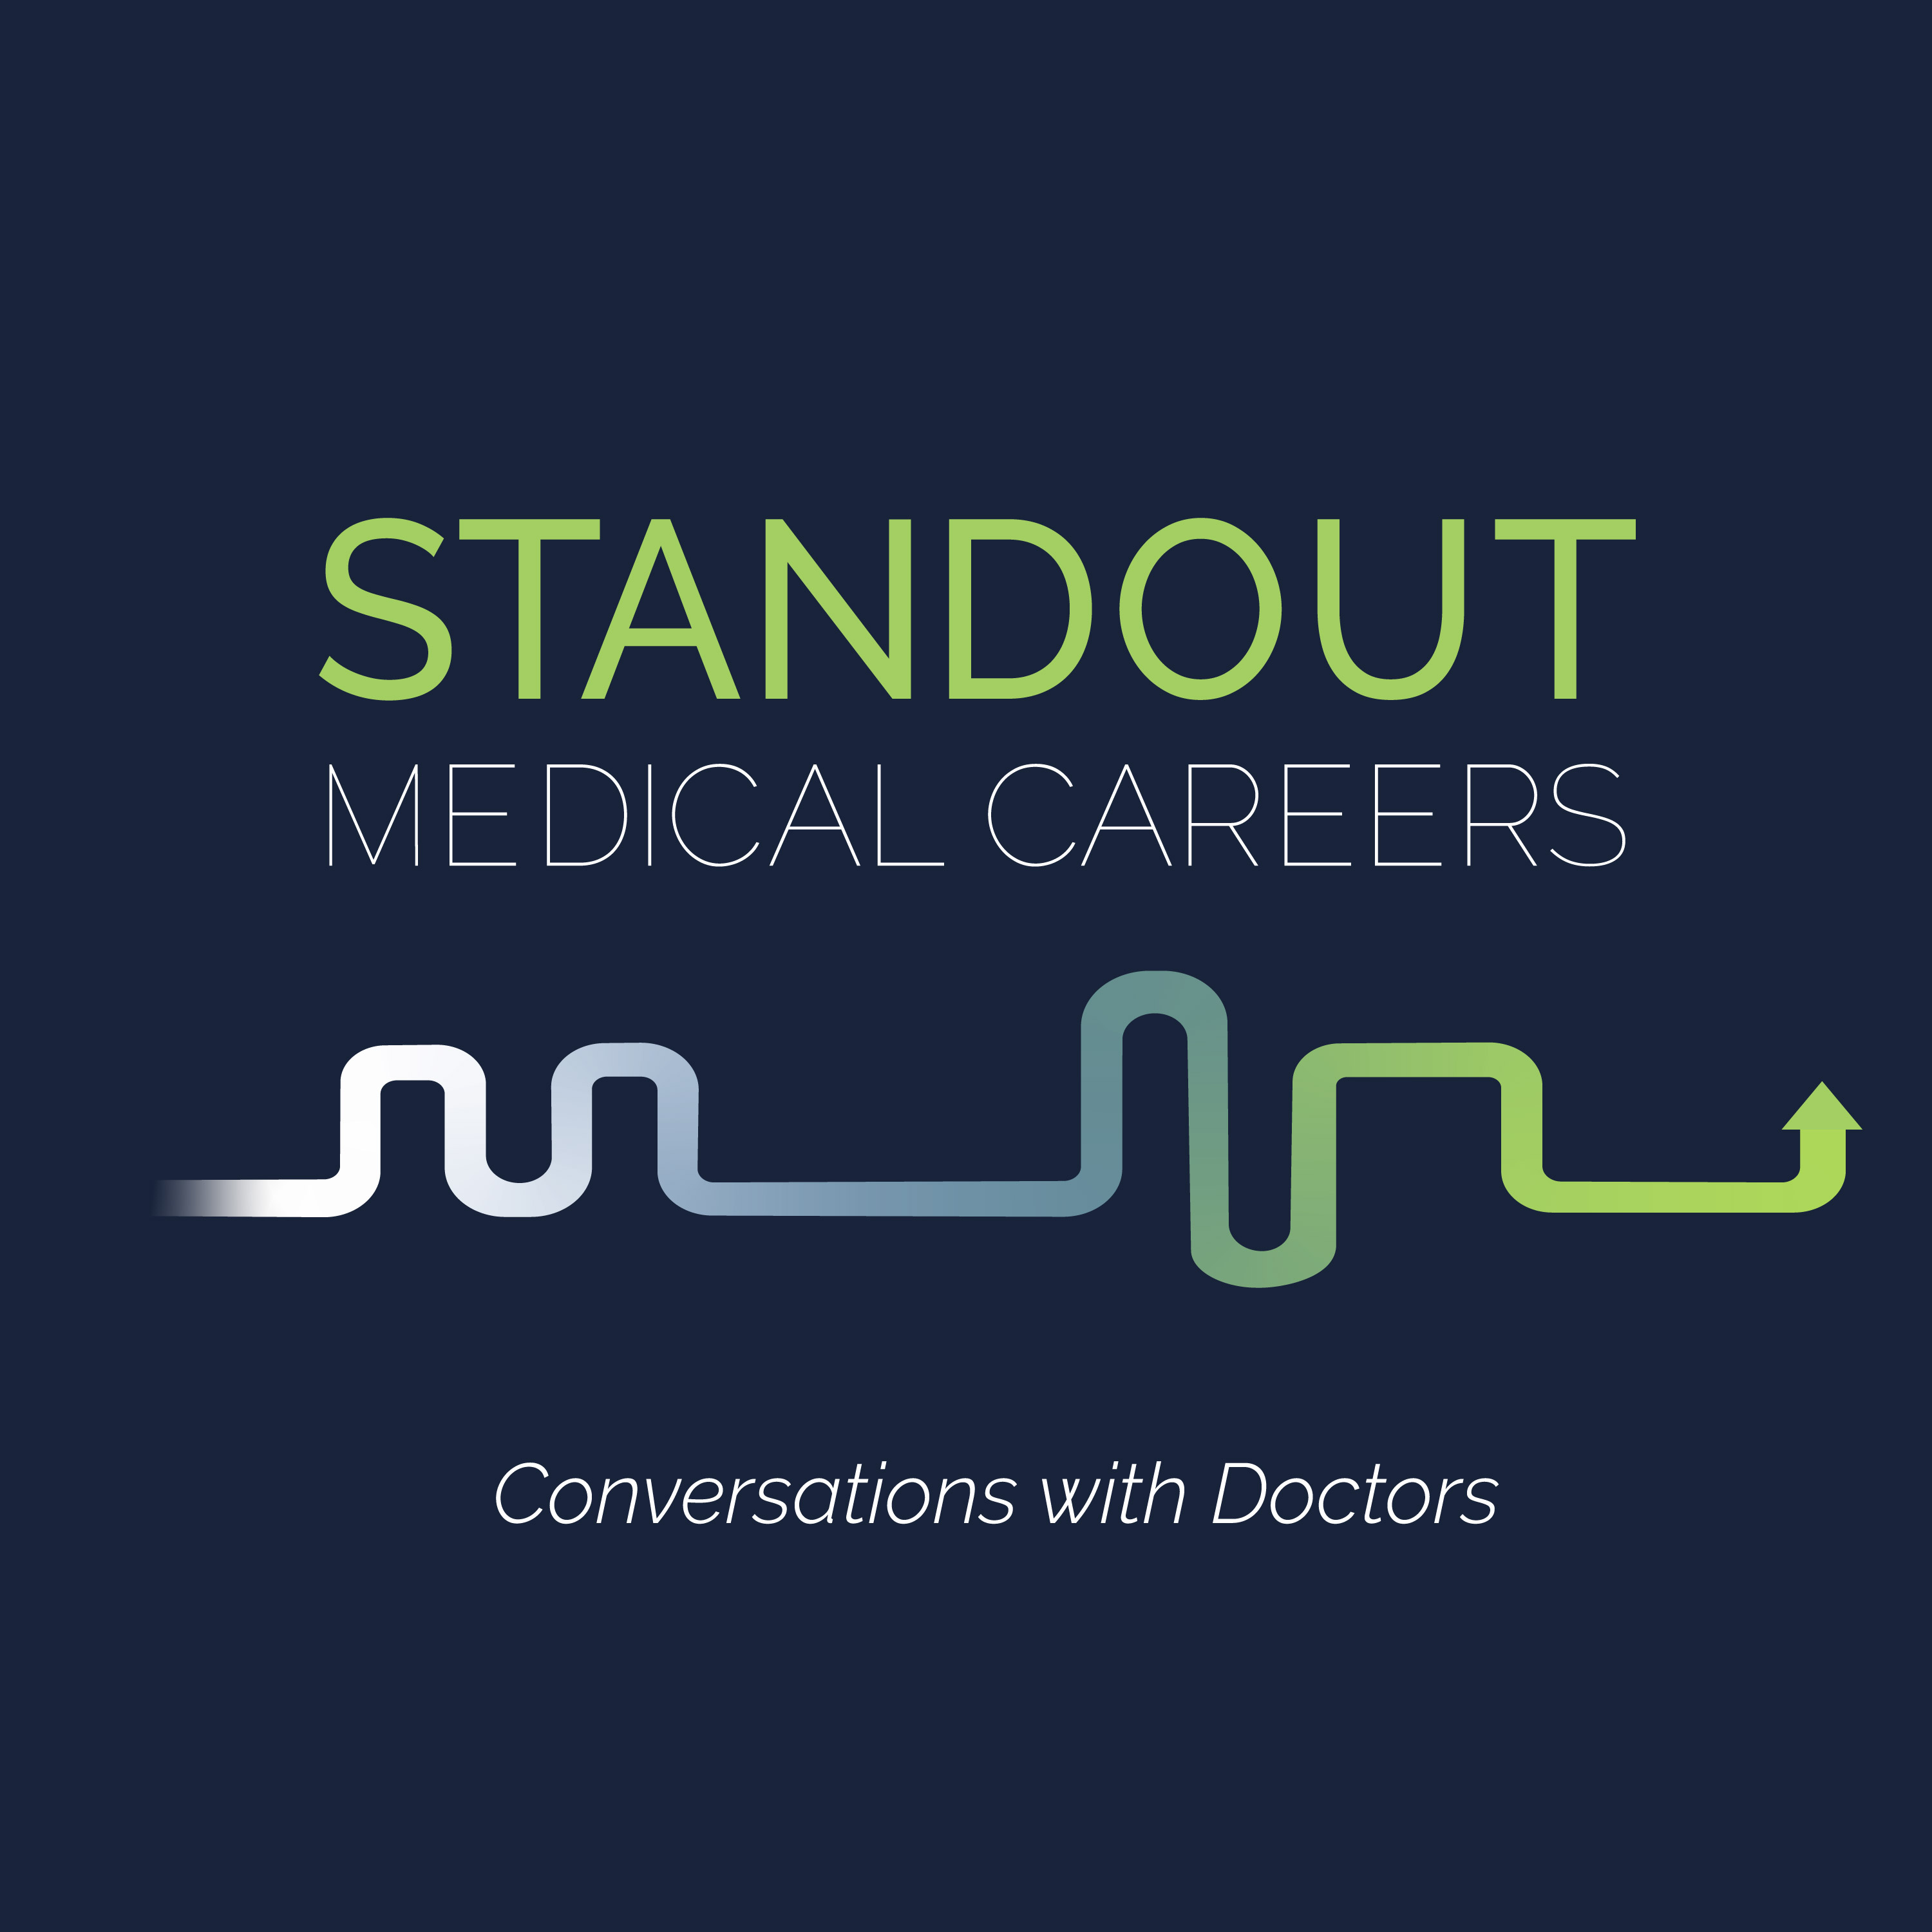 Artwork for podcast Standout Medical Careers